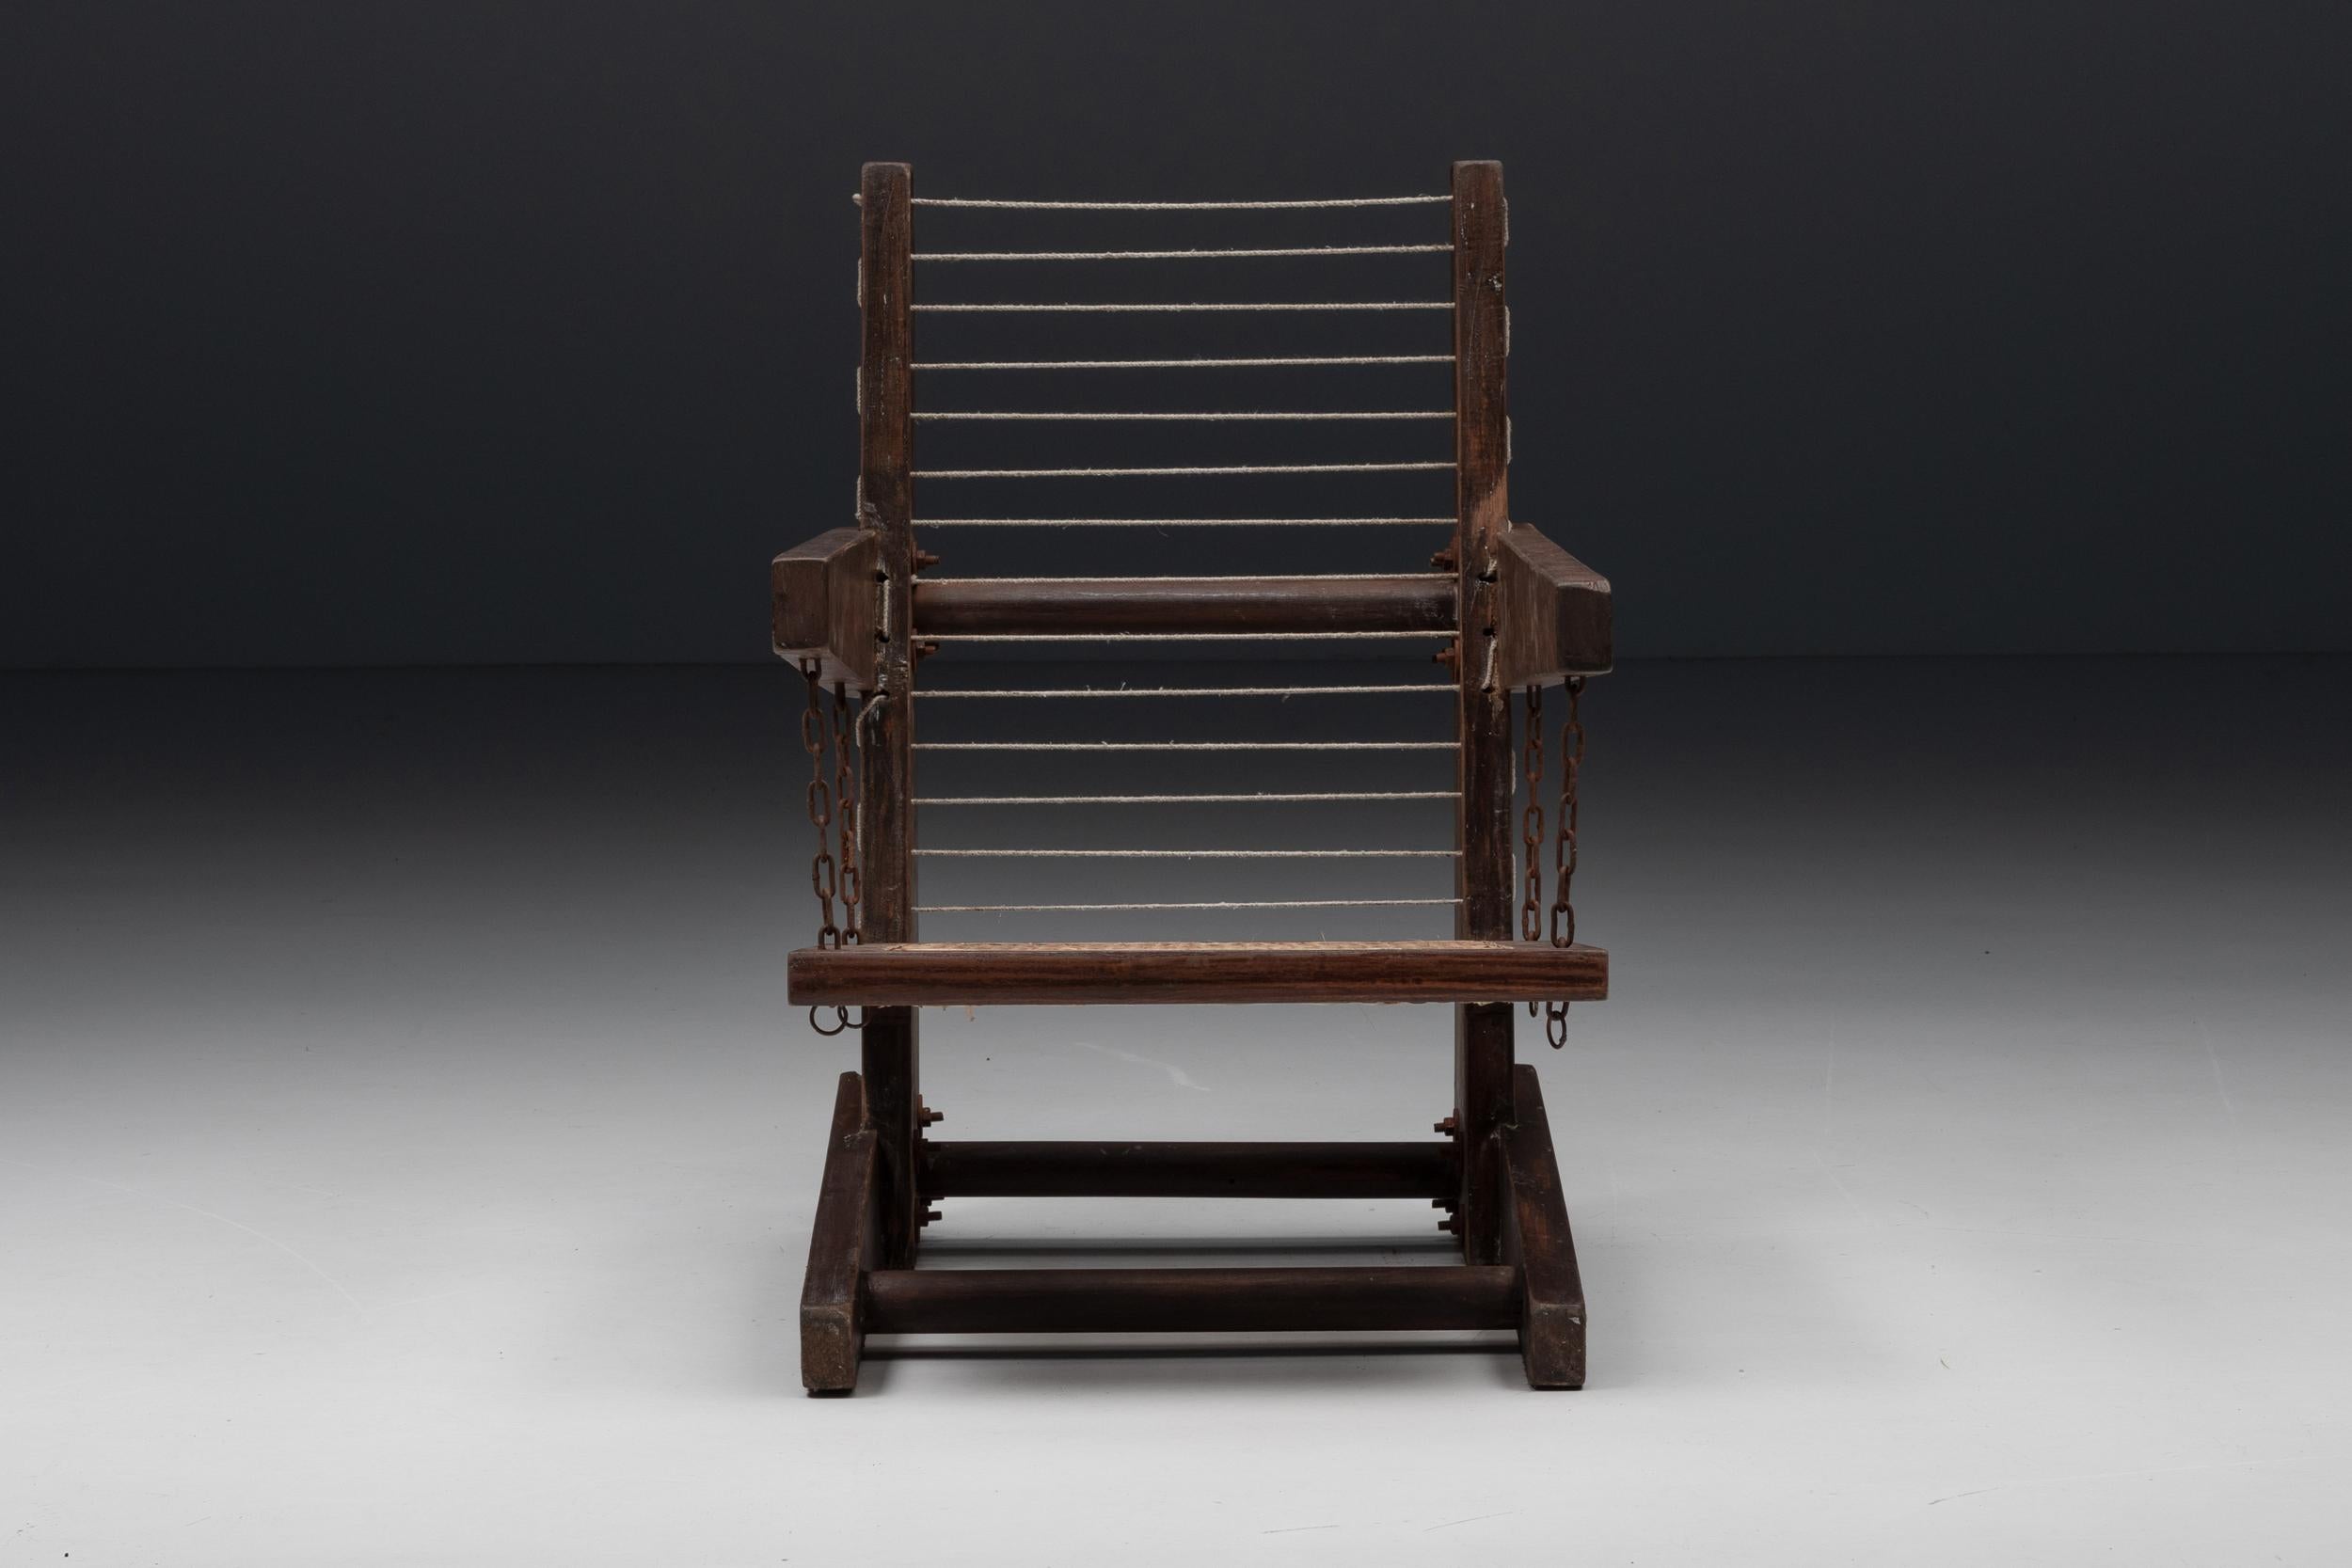 Pierre Jeanneret Demountable PJ-010615 Hanging Armchair, Chandigarh, 1953

Rare and Important Pierre Jeanneret Model PJ-010615 Armchairs also known as ‘Demountable Knock Down Chair’ made in Chandigarh, India in circa 1953-54. These extremely rare